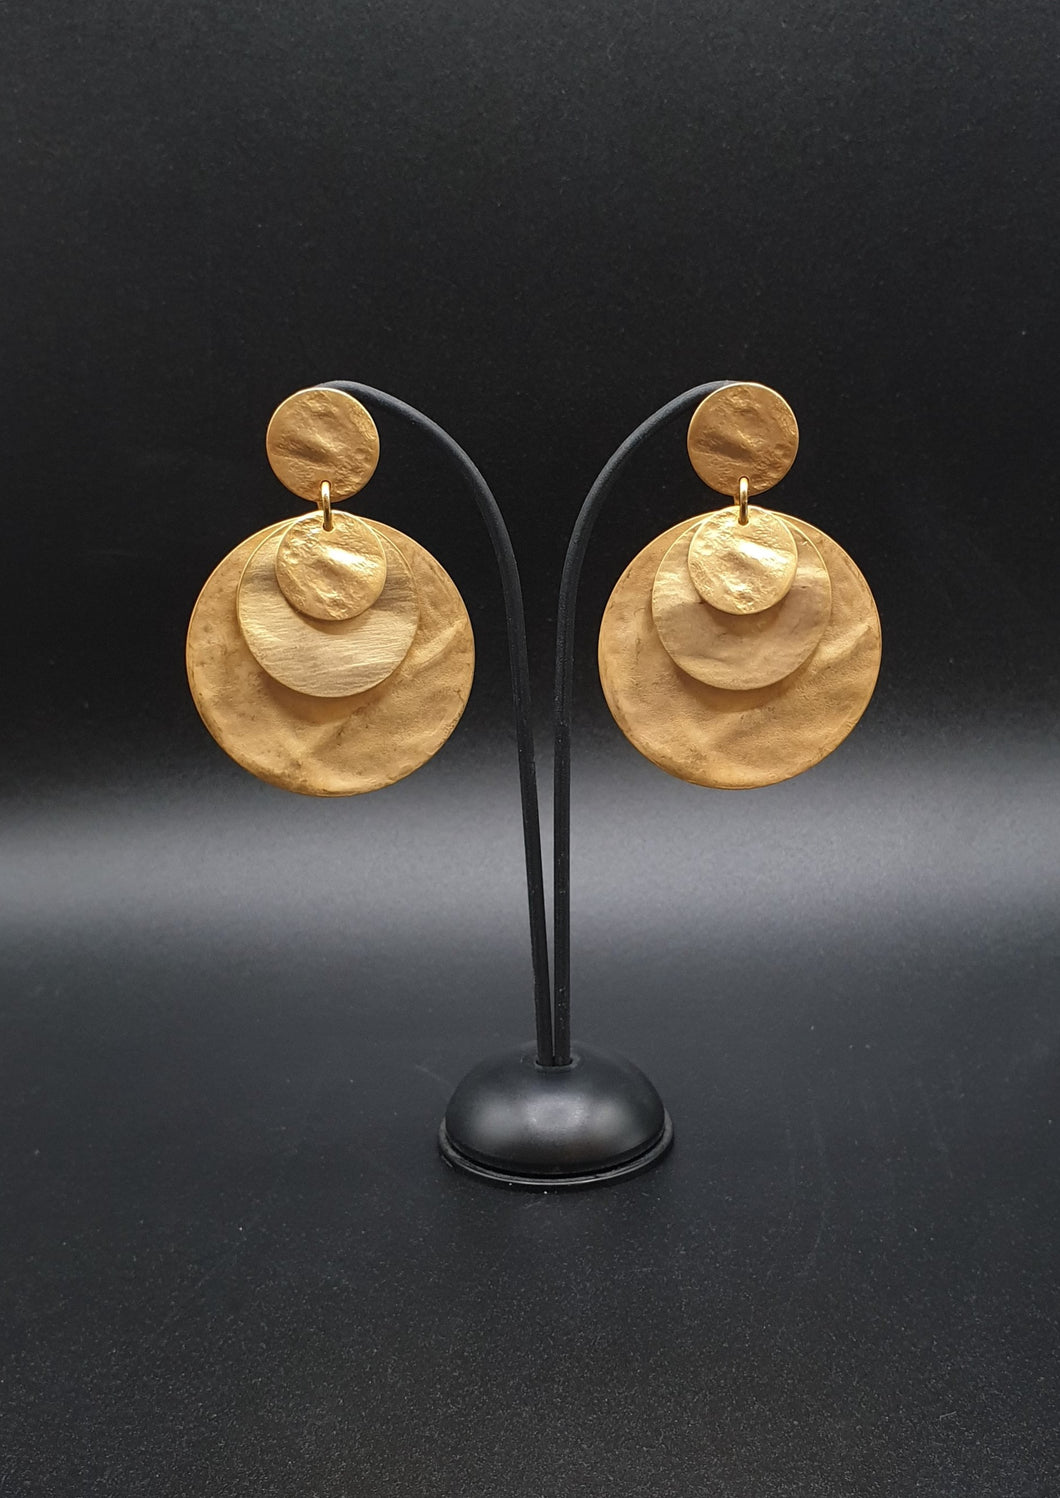 NEW golden metal stud earrings with decorative circles